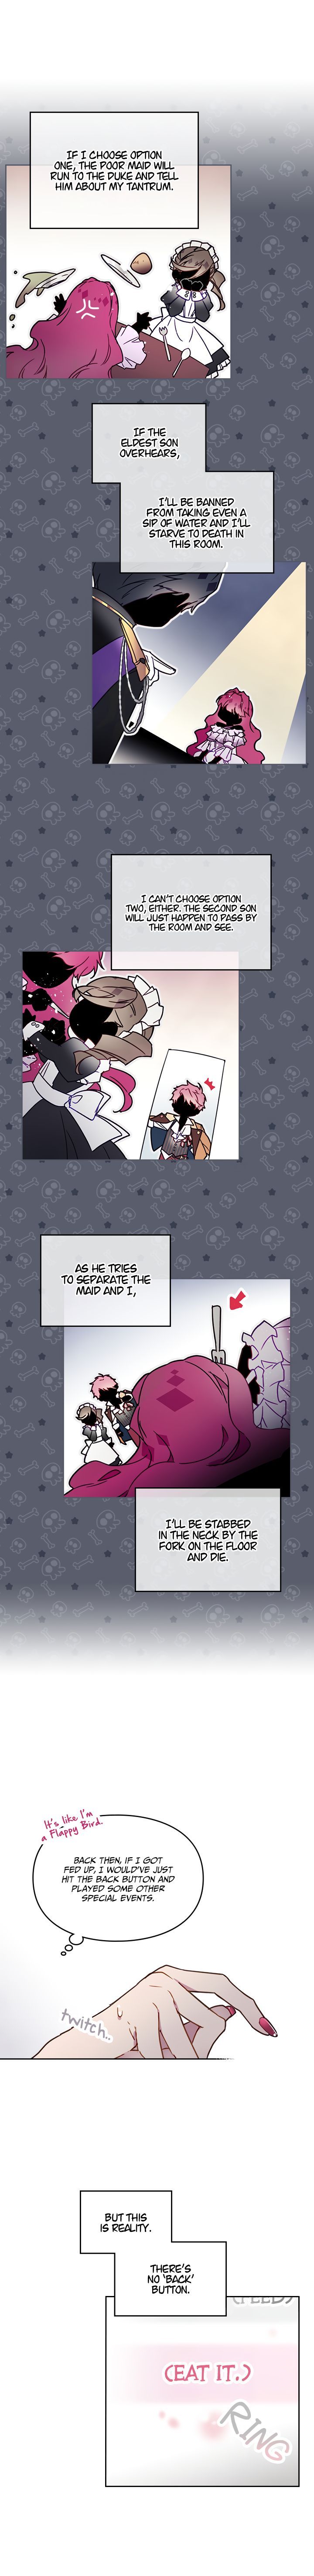 The Villains Ending Is Death Chapter 3 Page 2